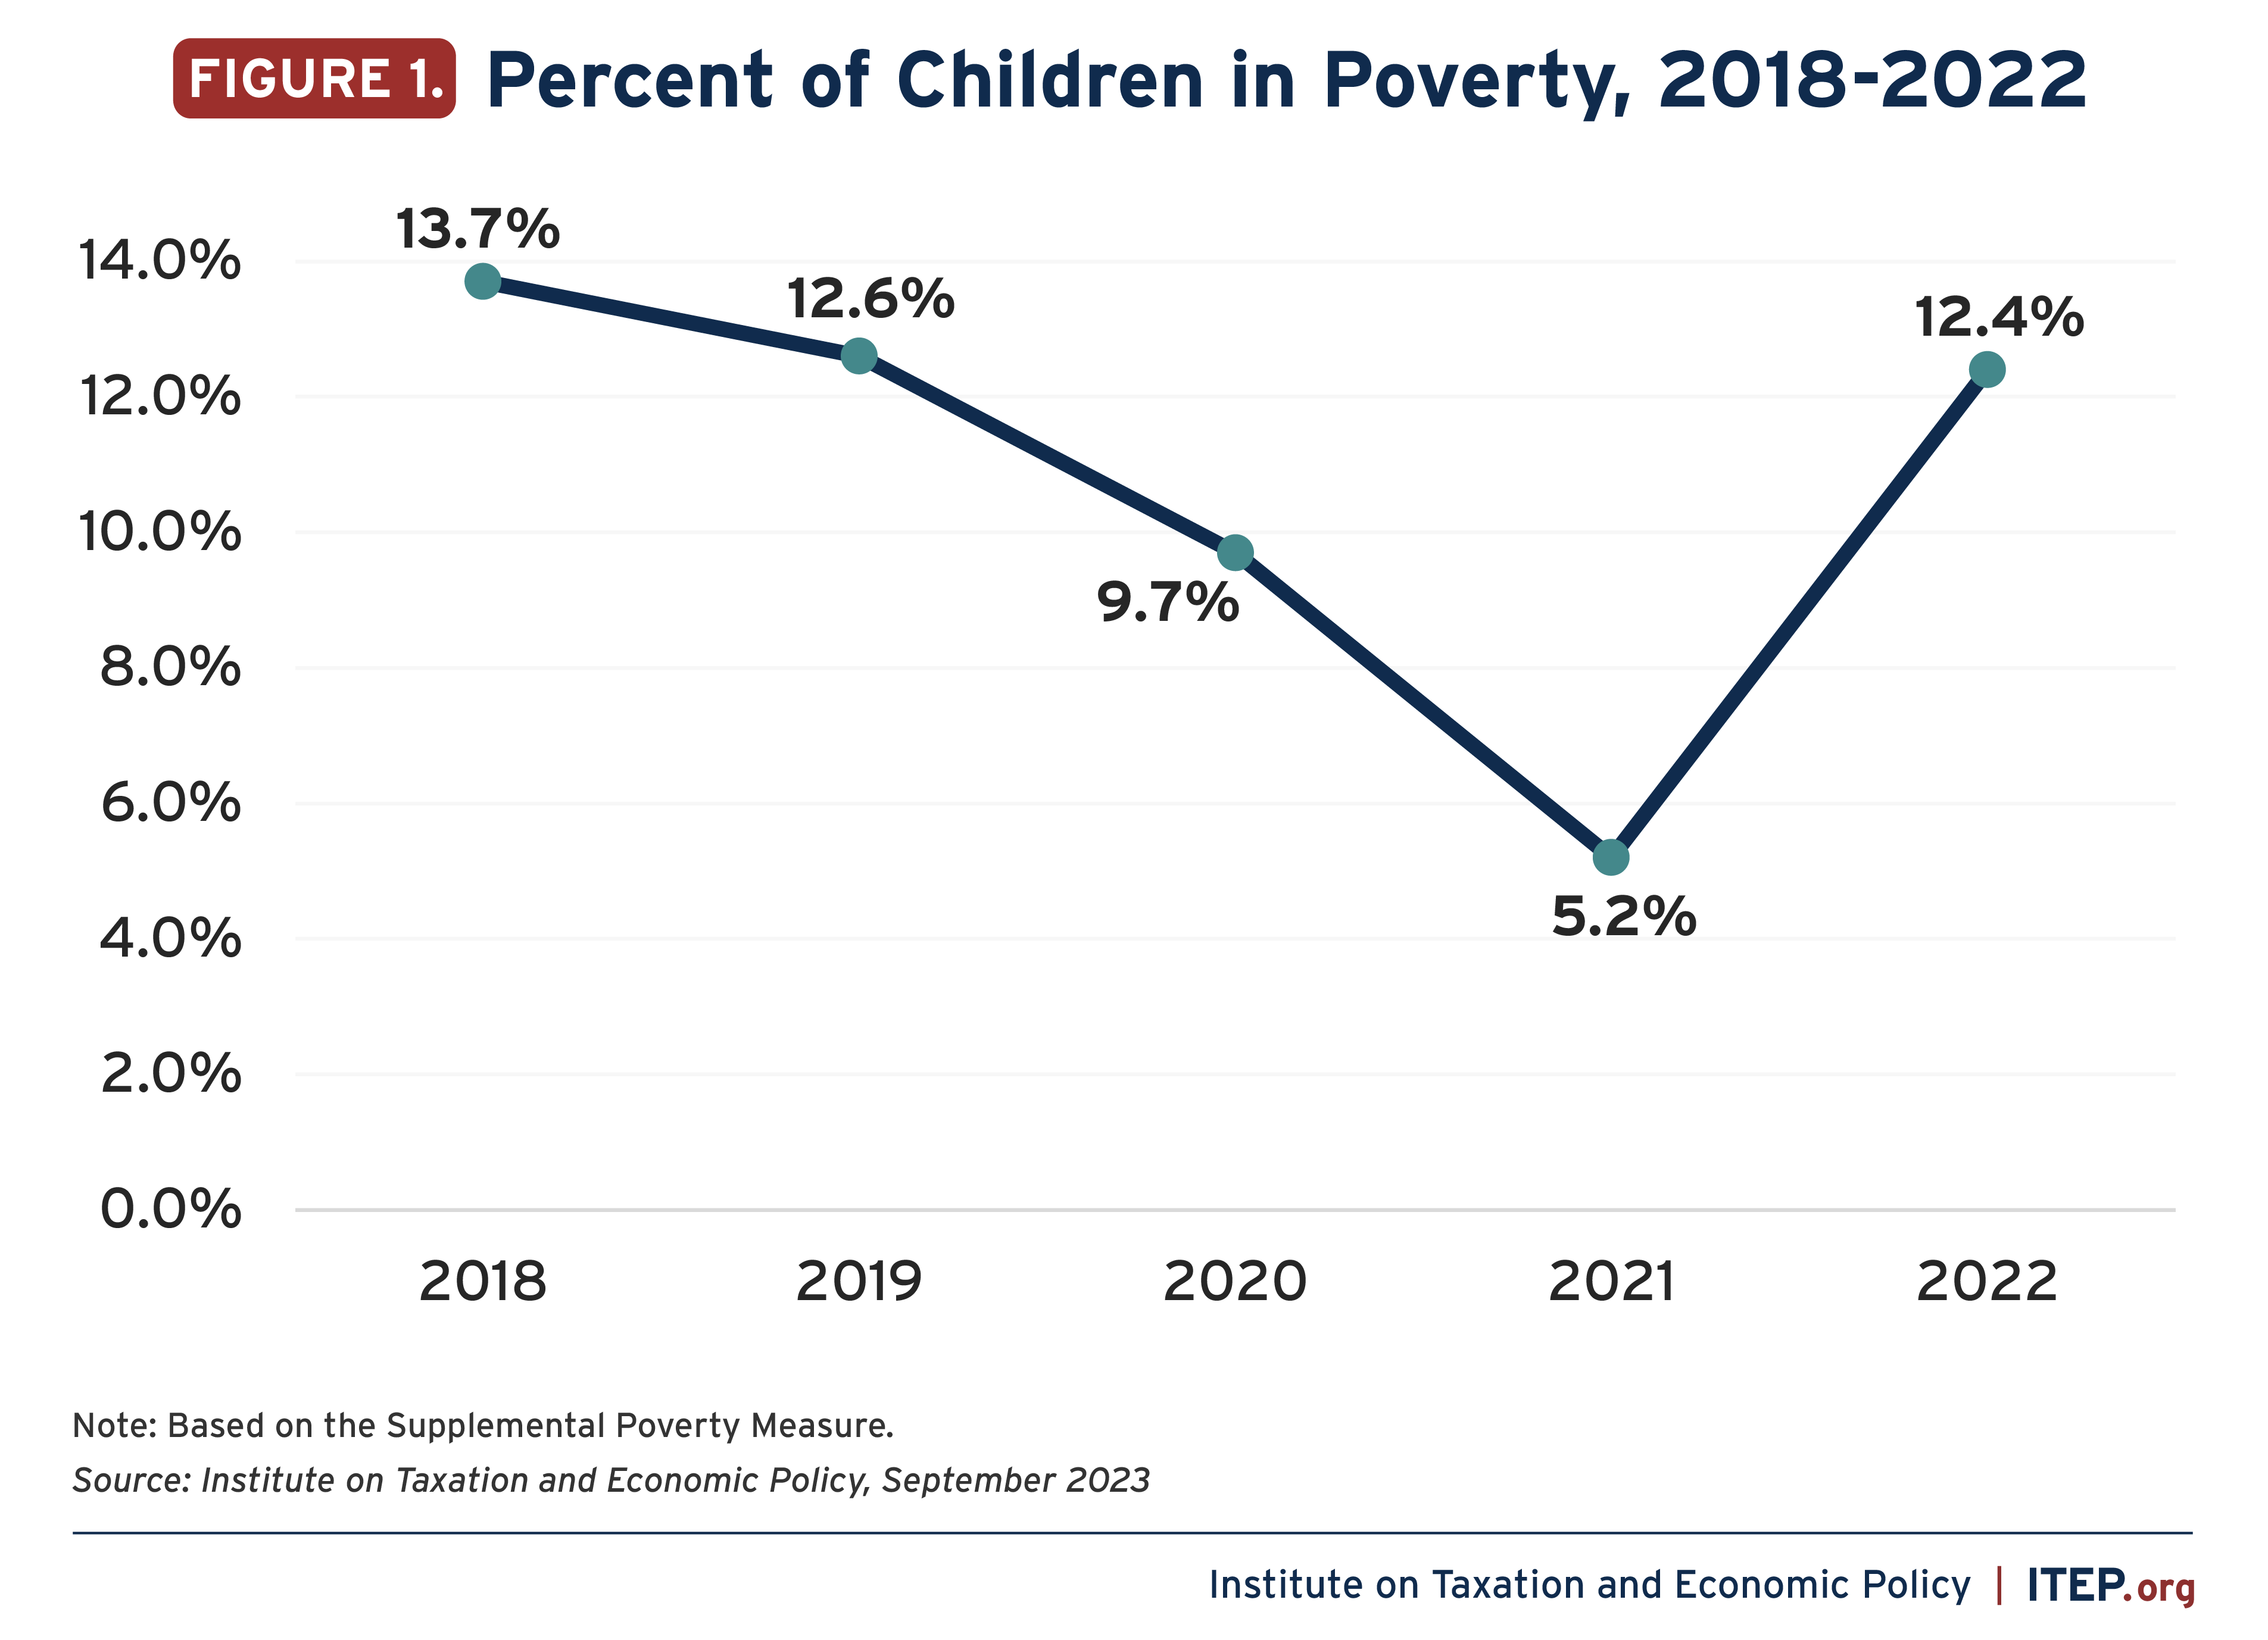 Percent-of-Children-in-Poverty-2018-2022-v3.png